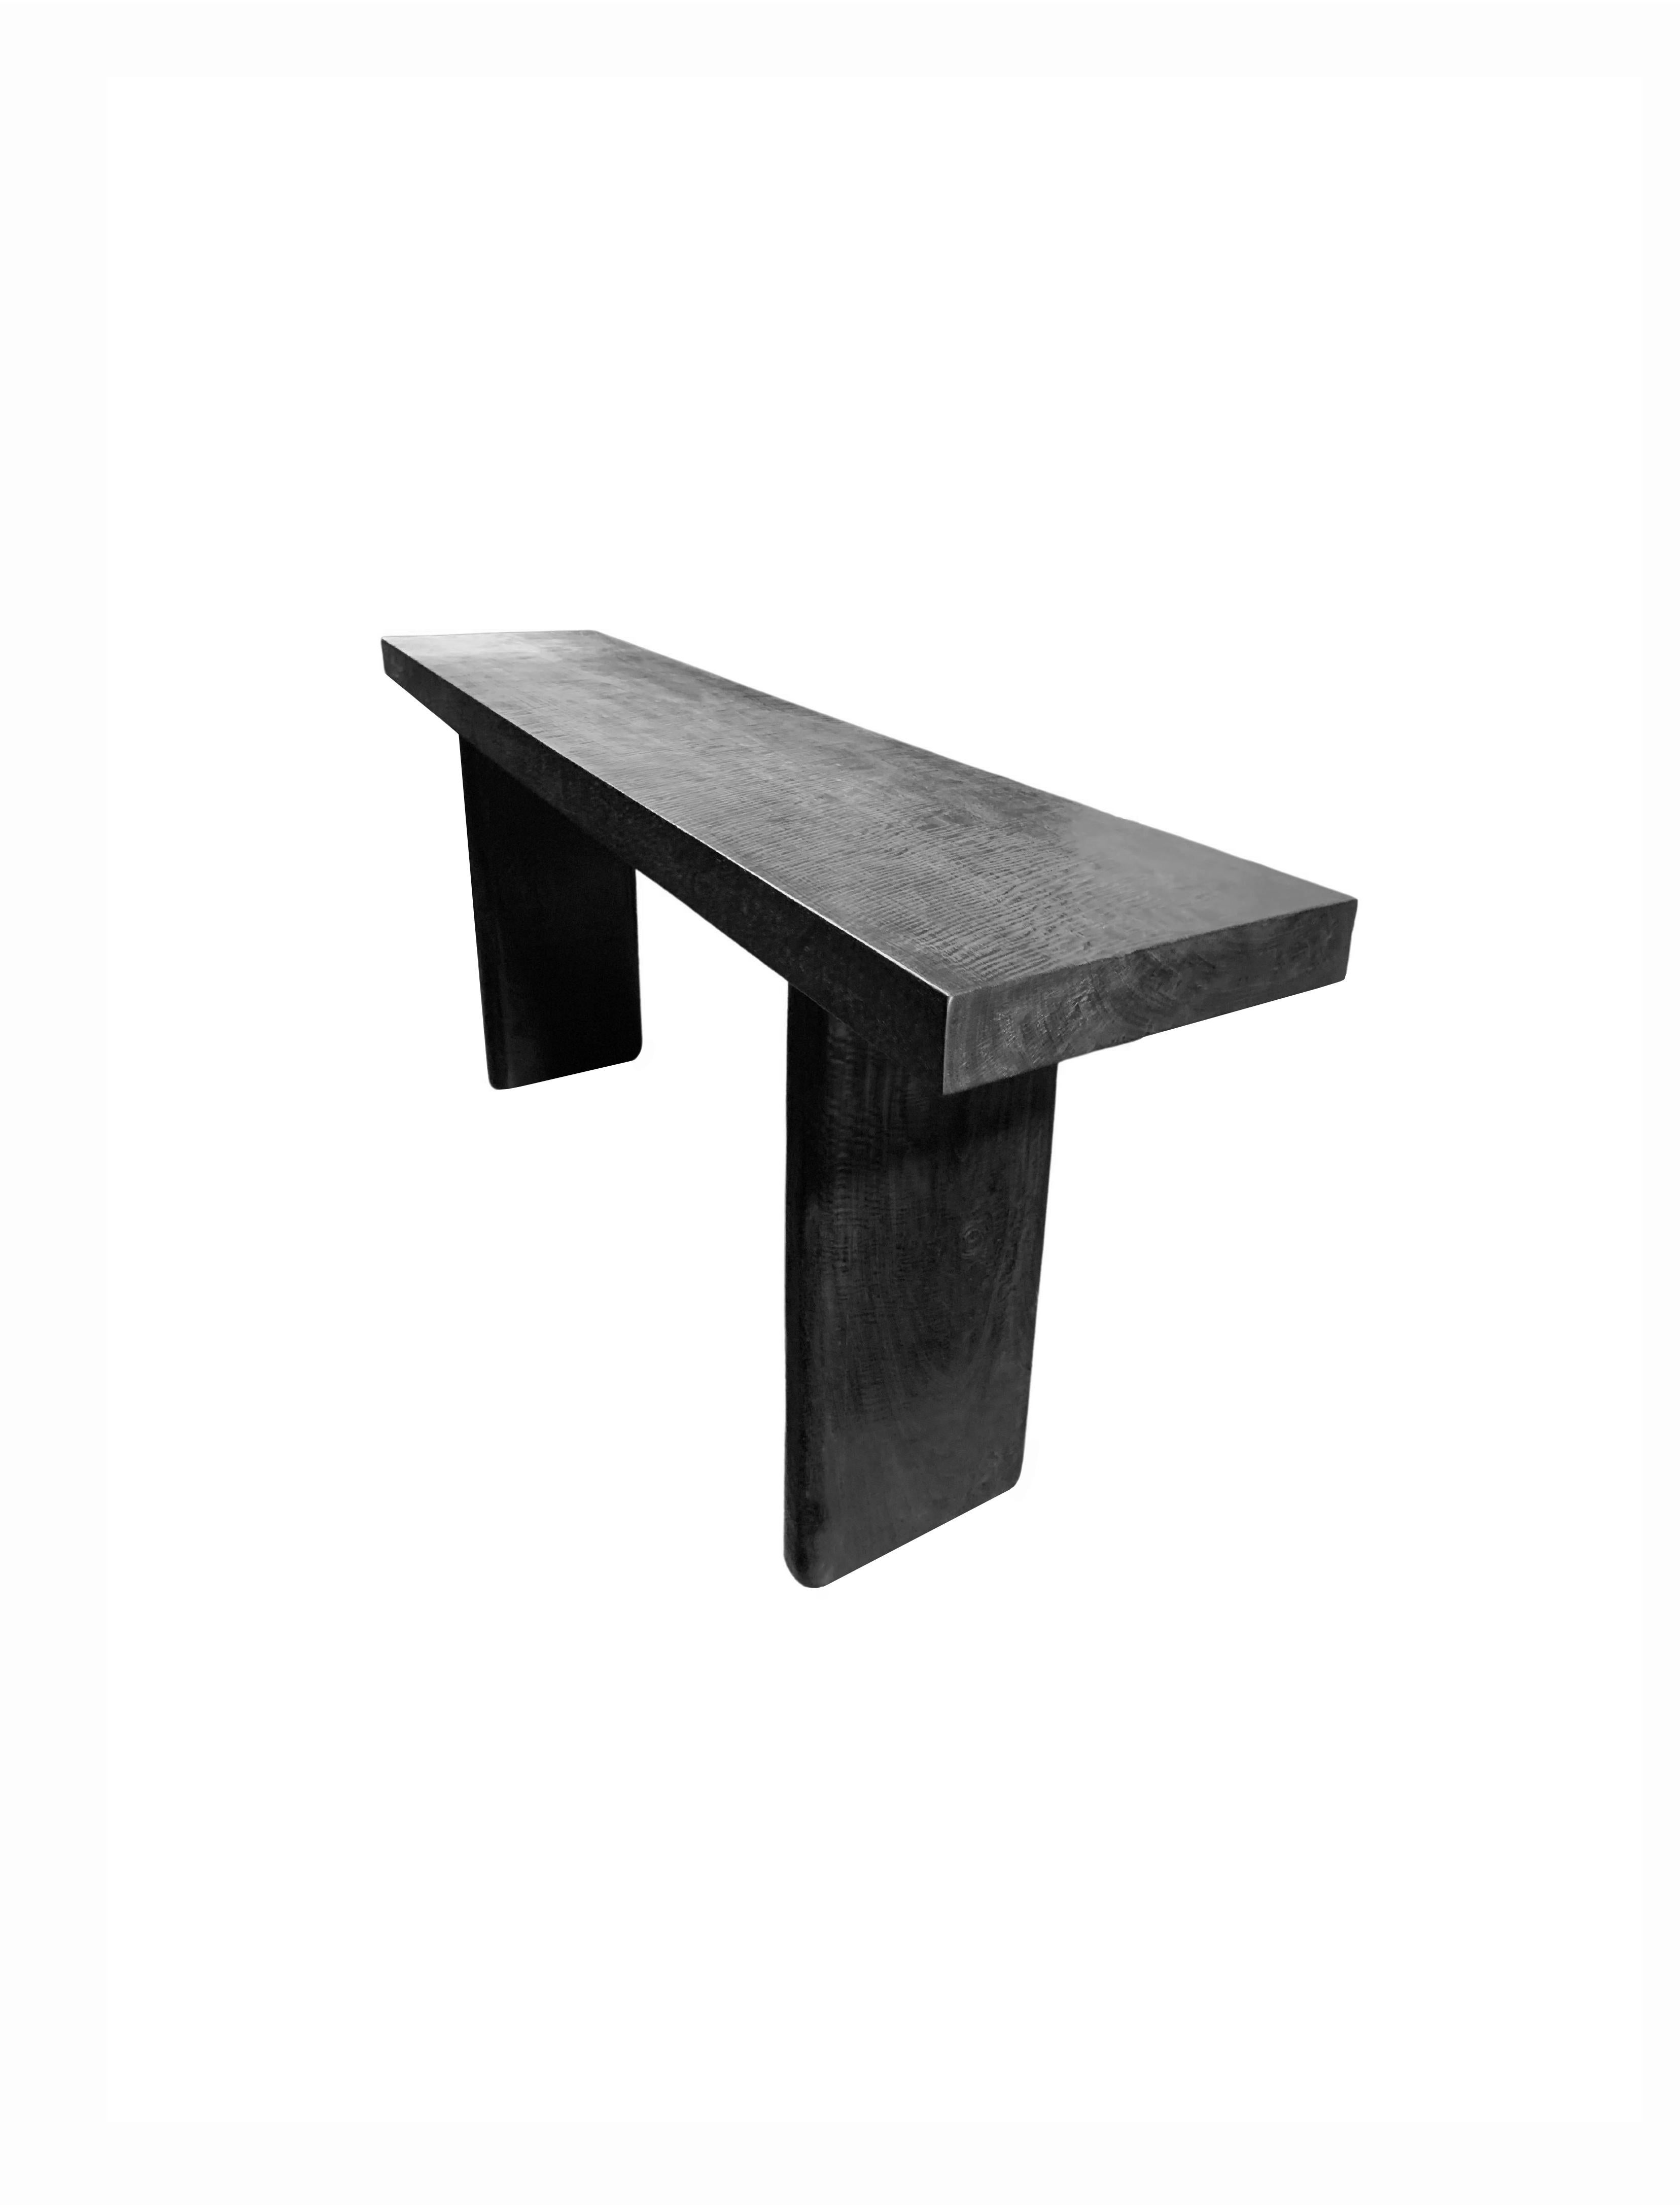 A sculptural mango wood console table. To achieve is rich black pigment the bench was burnt three times and then finished with a clear coat. The table was crafted from a solid block of mango wood. The table top sits atop two solid, narrow legs. The